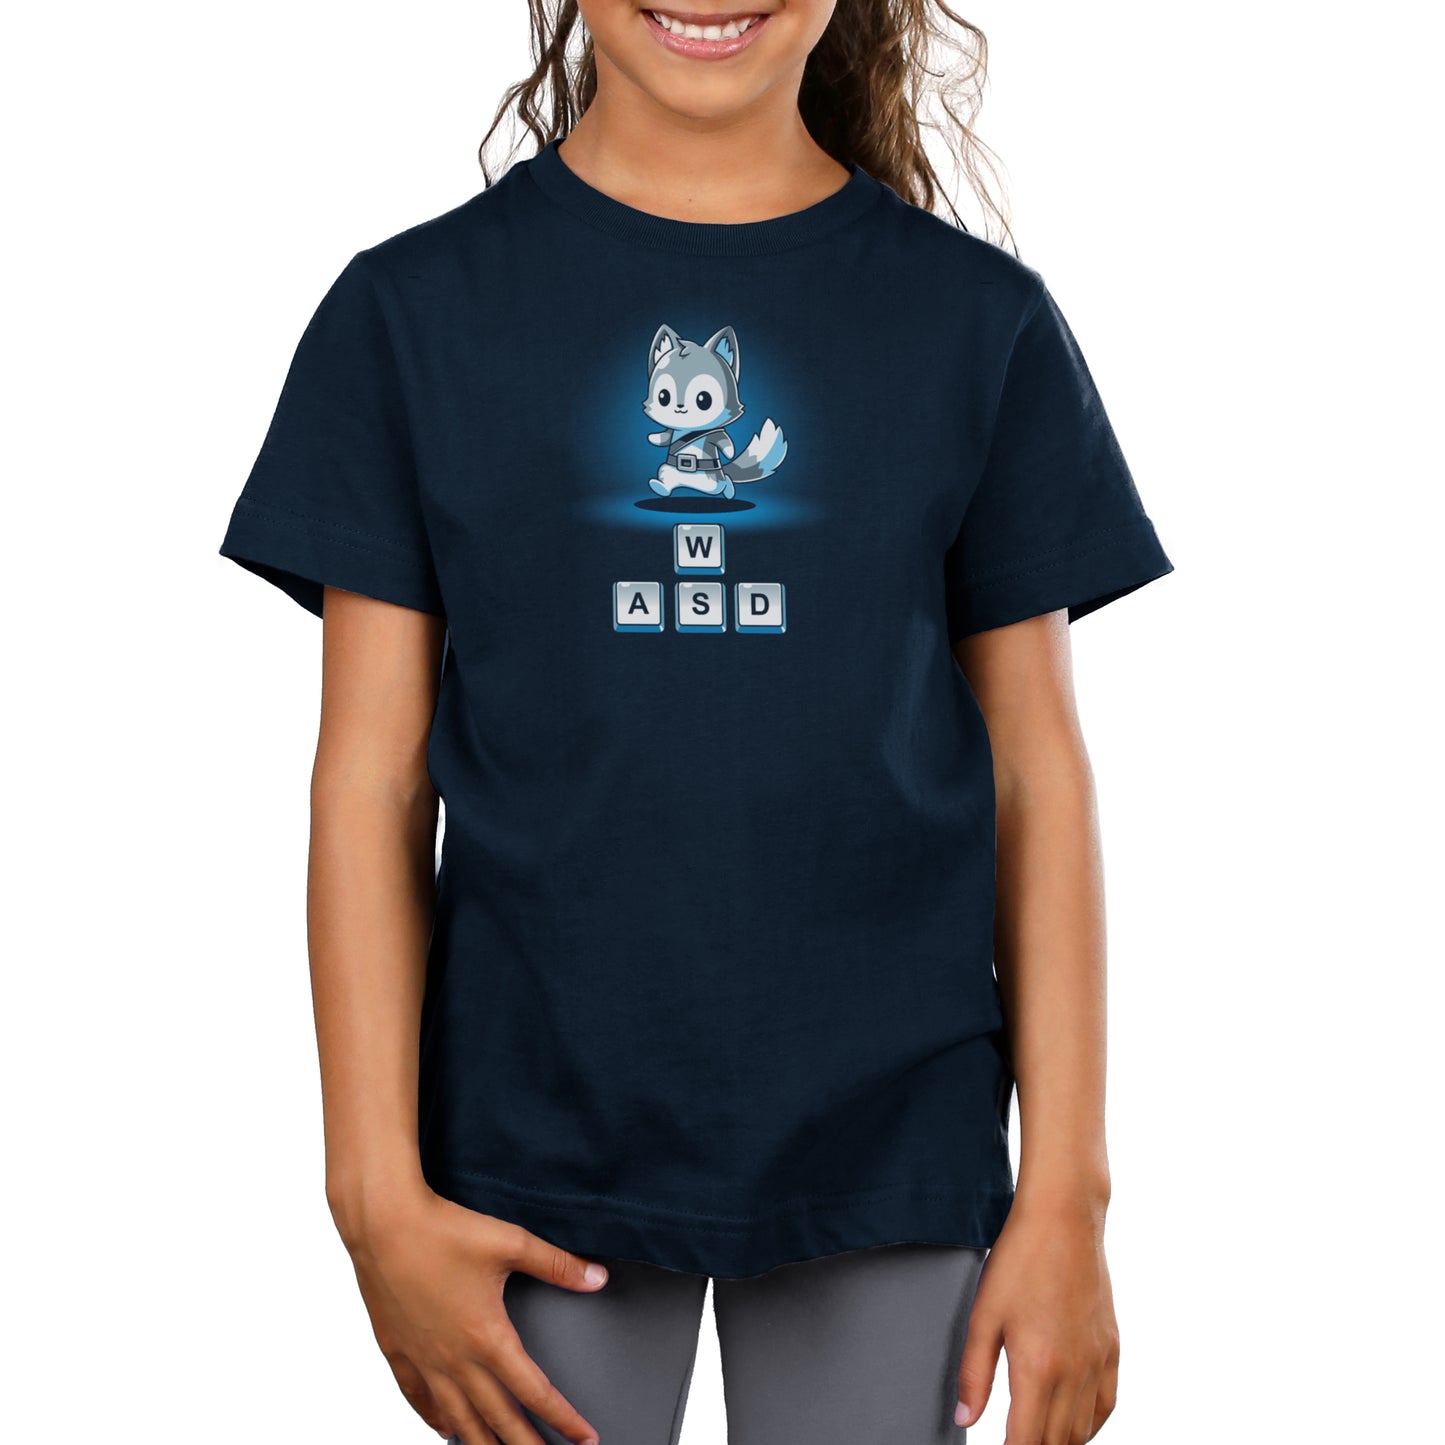 Young child wearing a navy blue T-shirt with a cartoon fox and the letters W, A, S, D printed on it, perfect for fans of PC games. The "Keys to Adventure" by monsterdigital is made from super soft ringspun cotton for ultimate comfort.